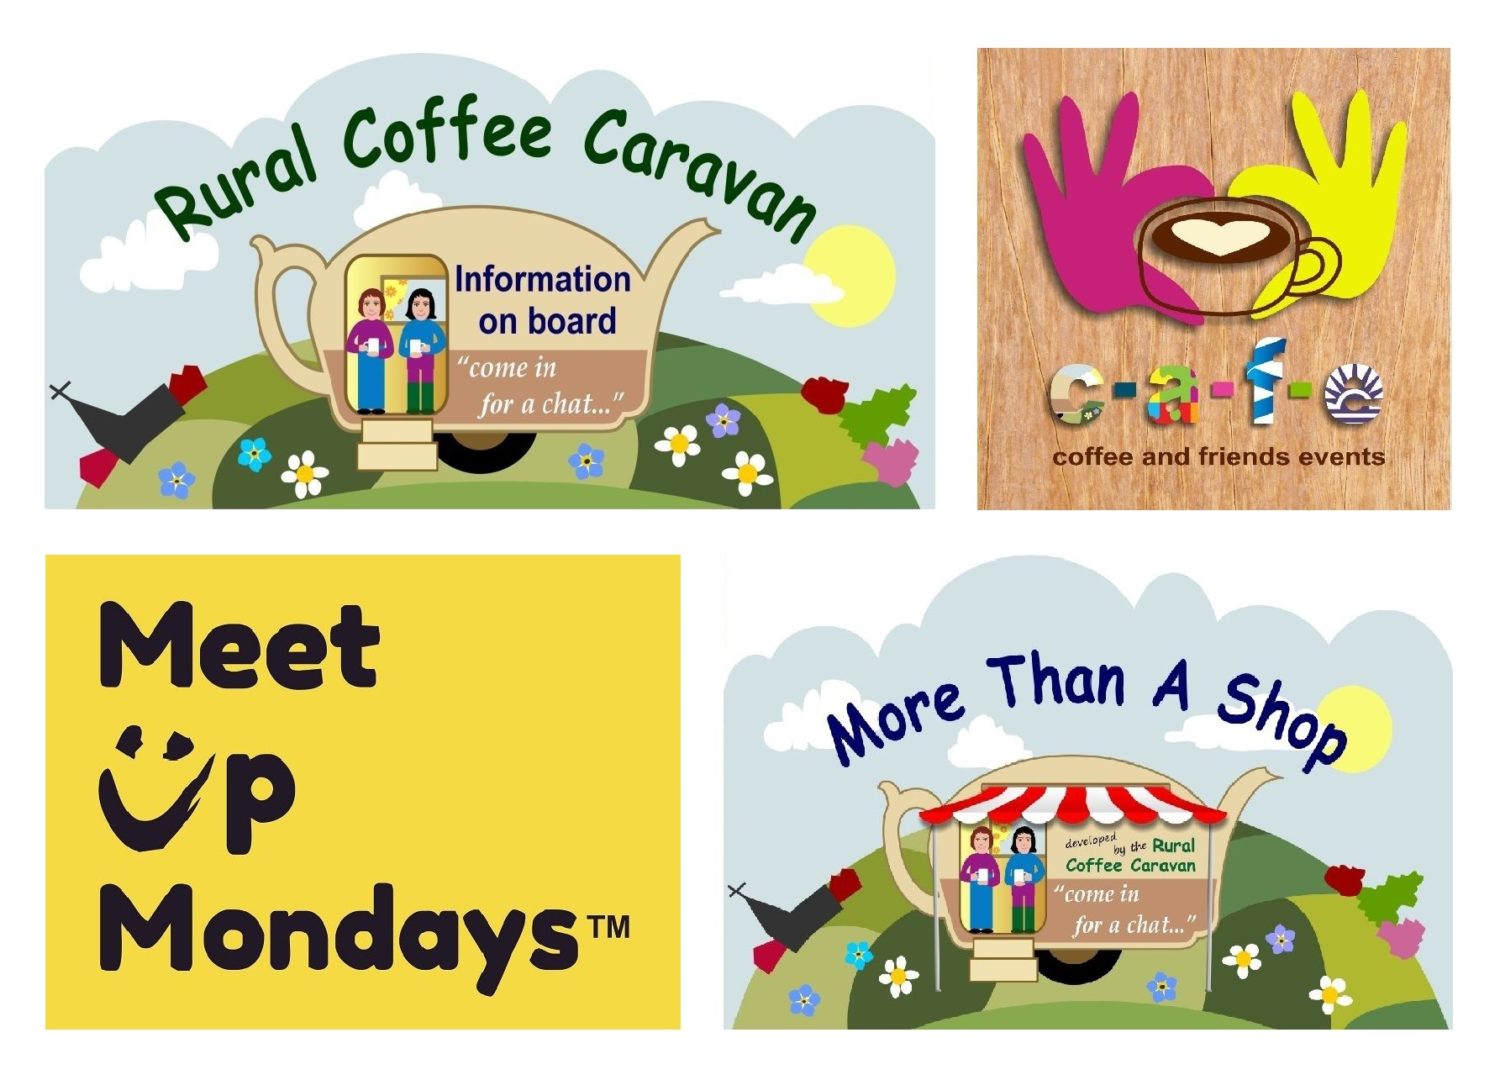 Logos for Rural Coffee Caravan, c-a-f-e (coffee and friends events), MeetUpMondays and More Than A Shop